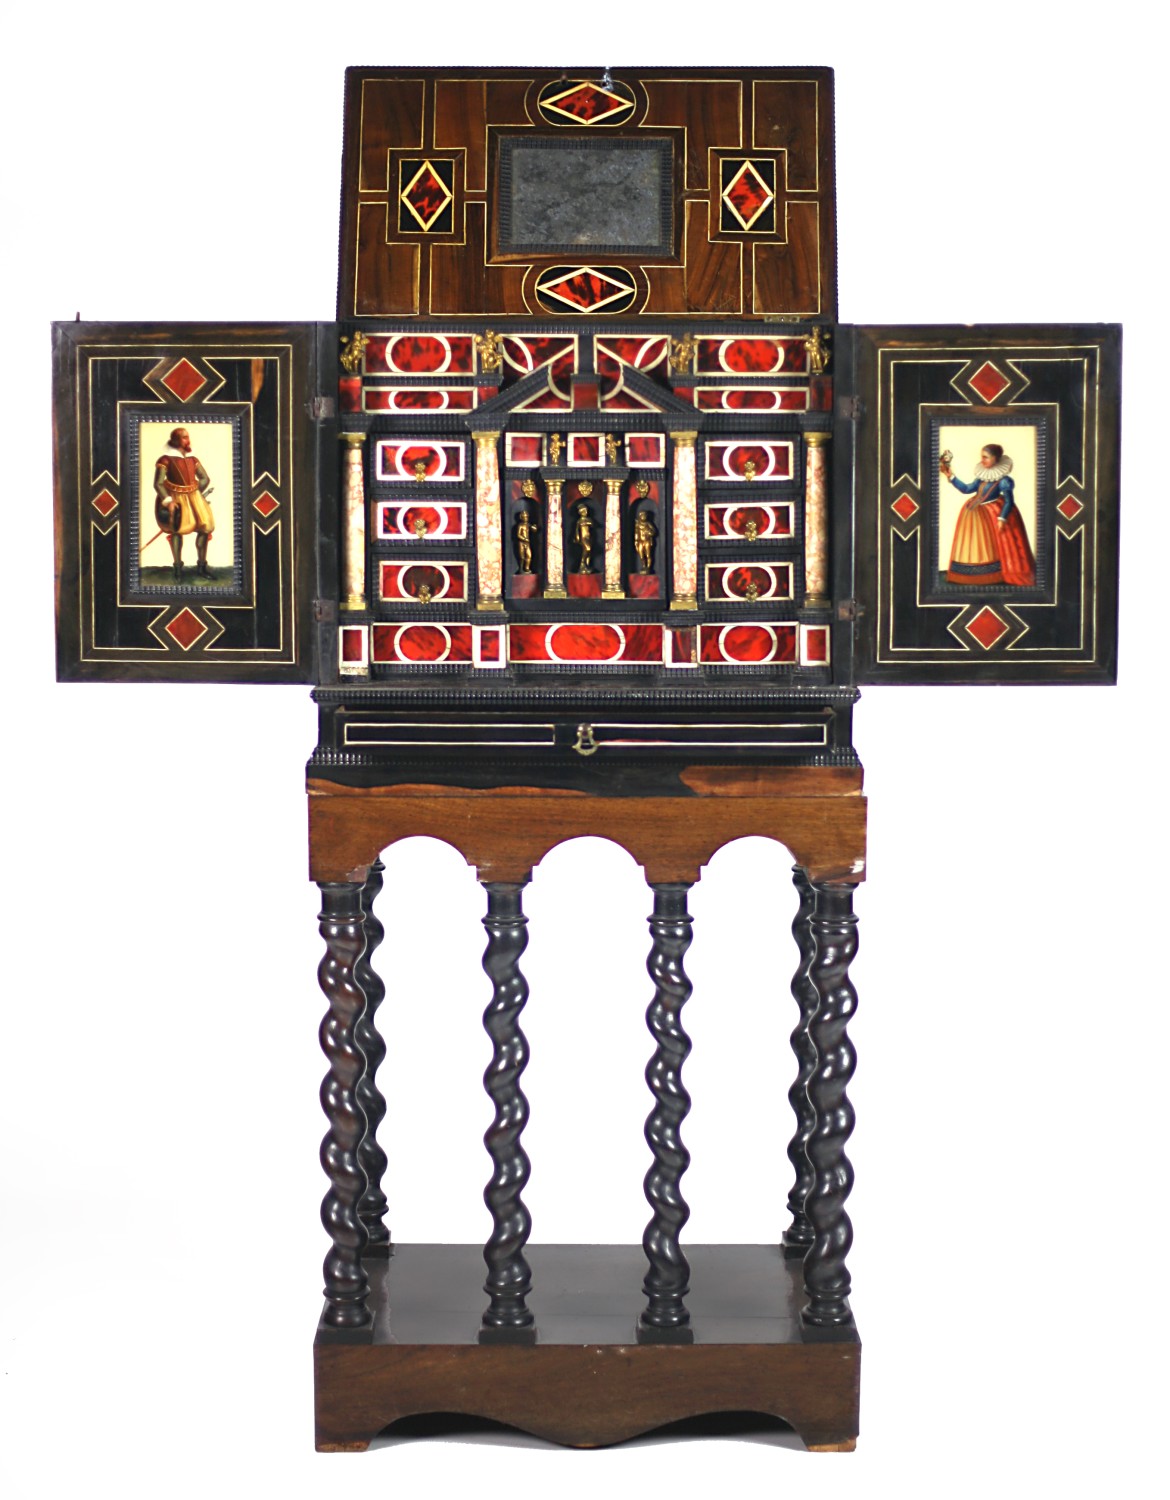 A rare and attractive antique coromandel wood Cabinet on Stand, the inlaid canopy lift top with